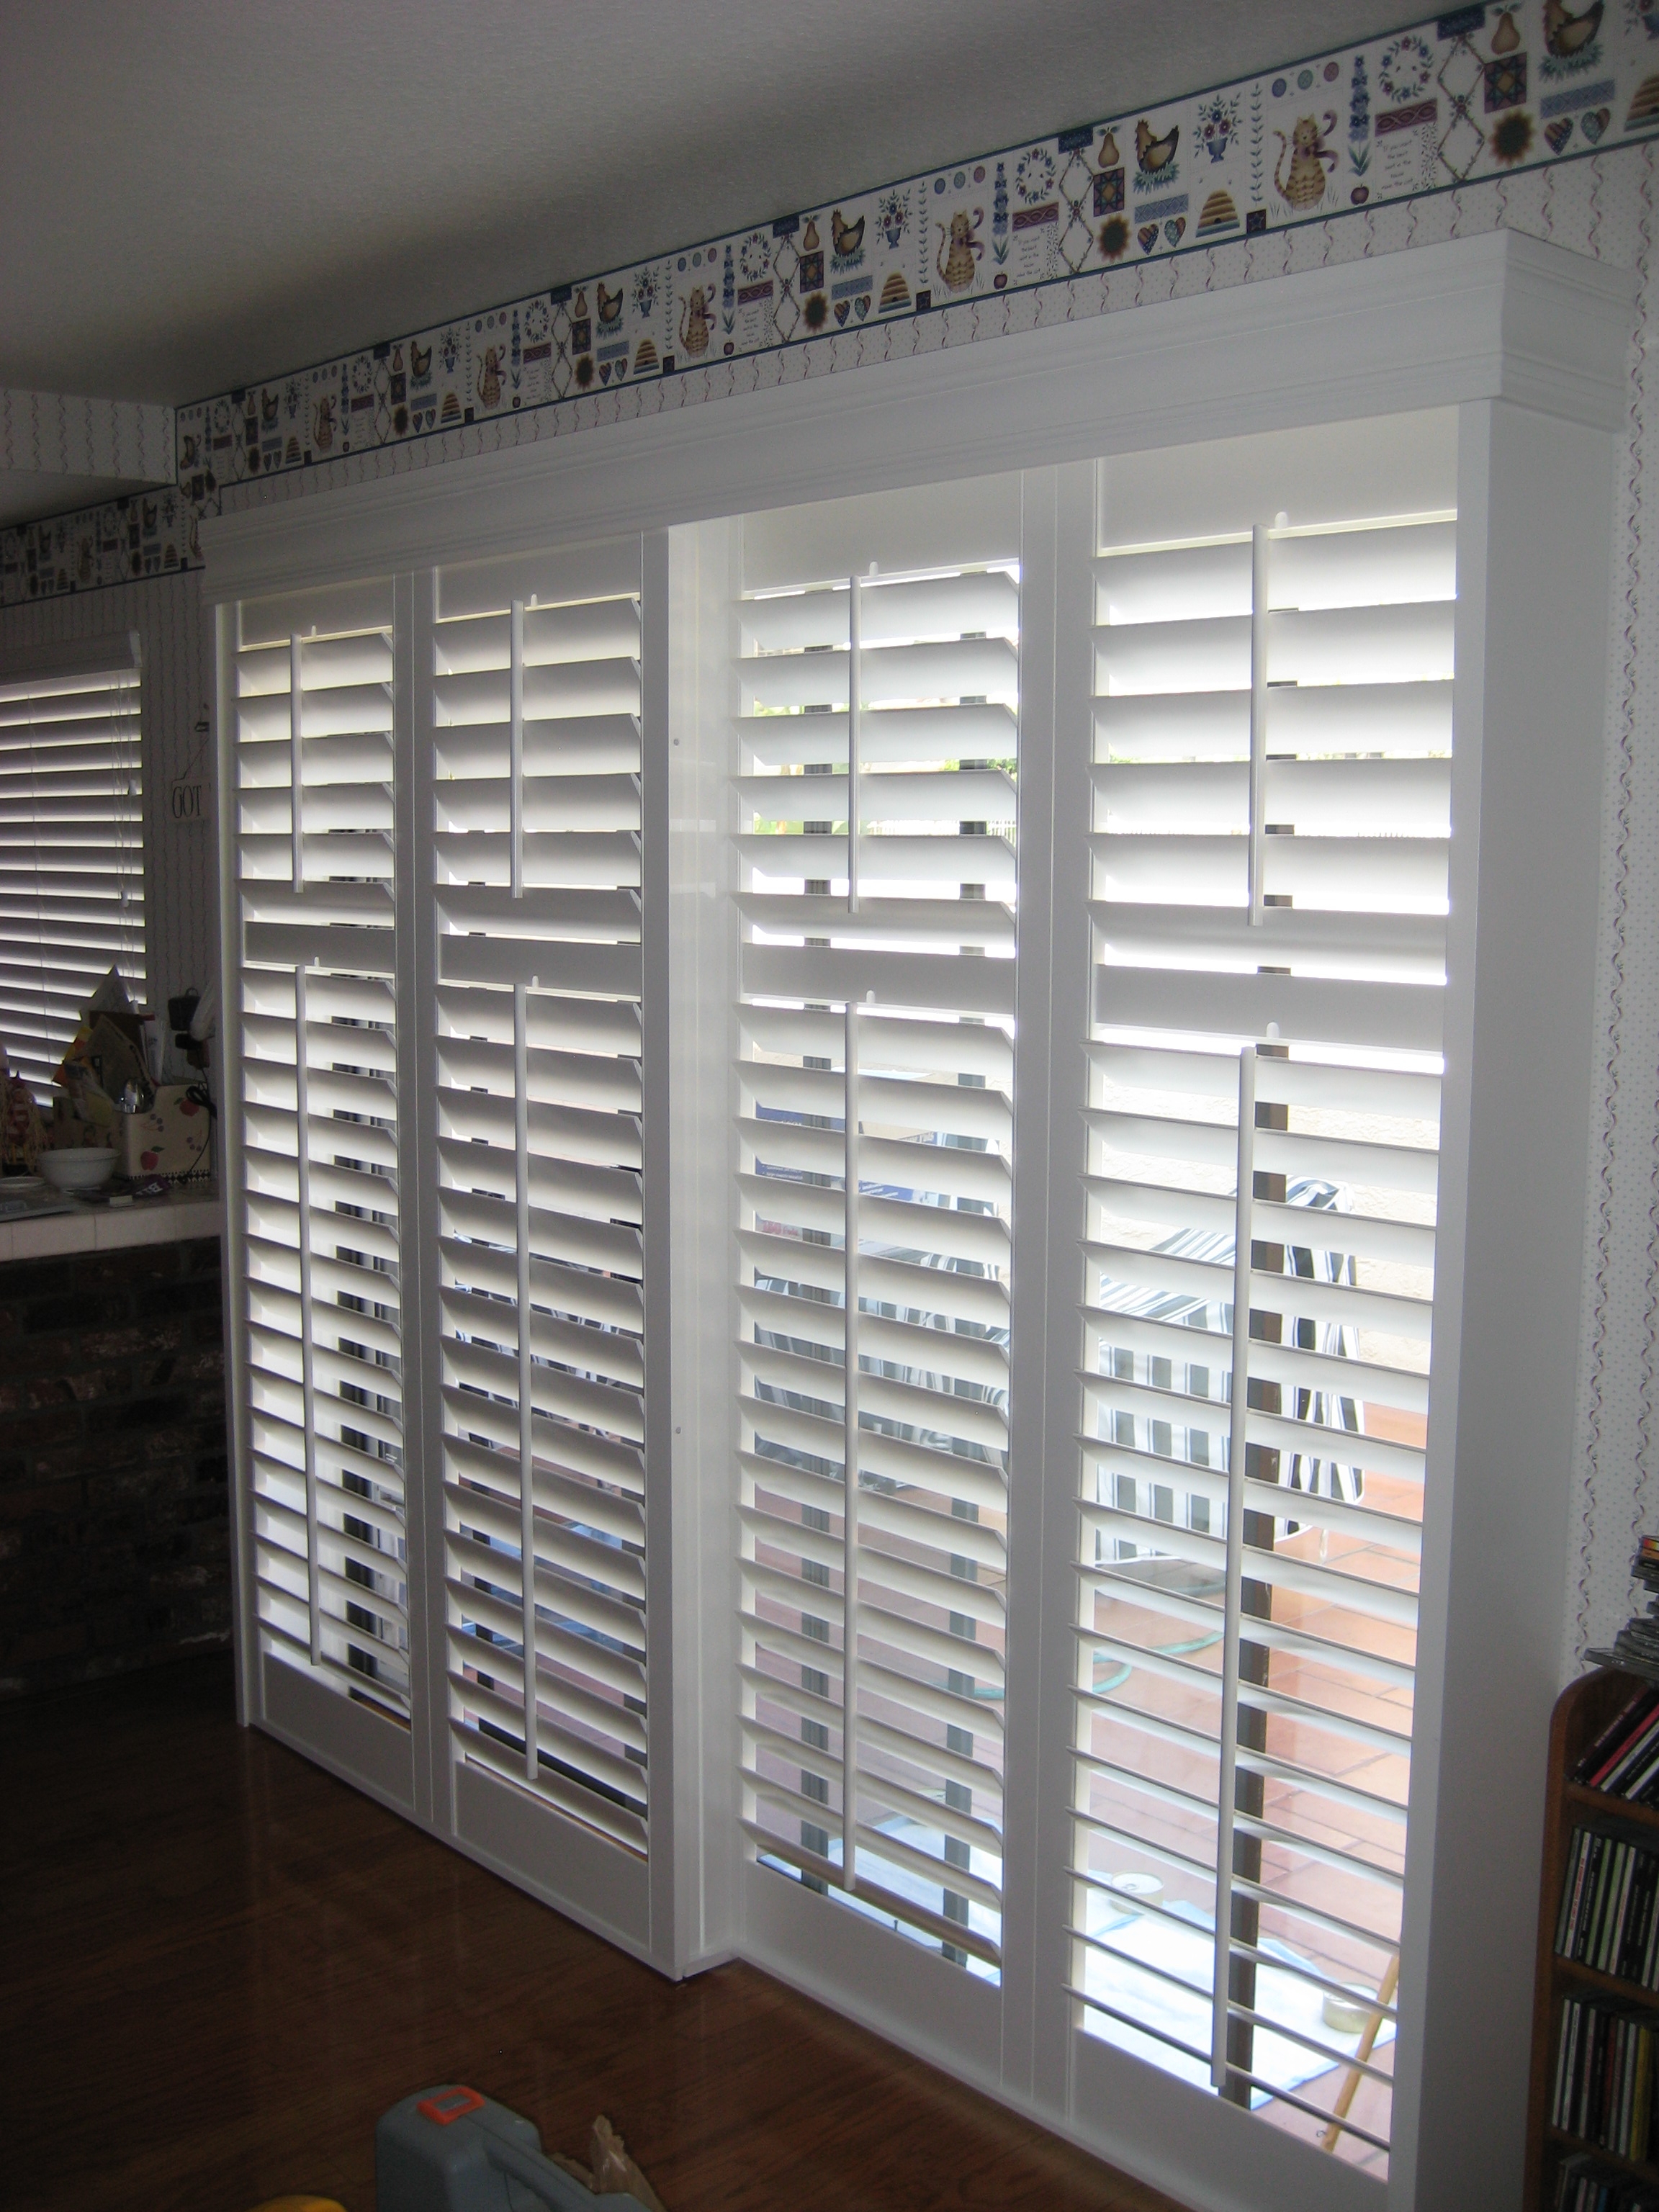 Wood Shutters For Sliding Patio Doorswooden shutters for patio doors picture album images picture are